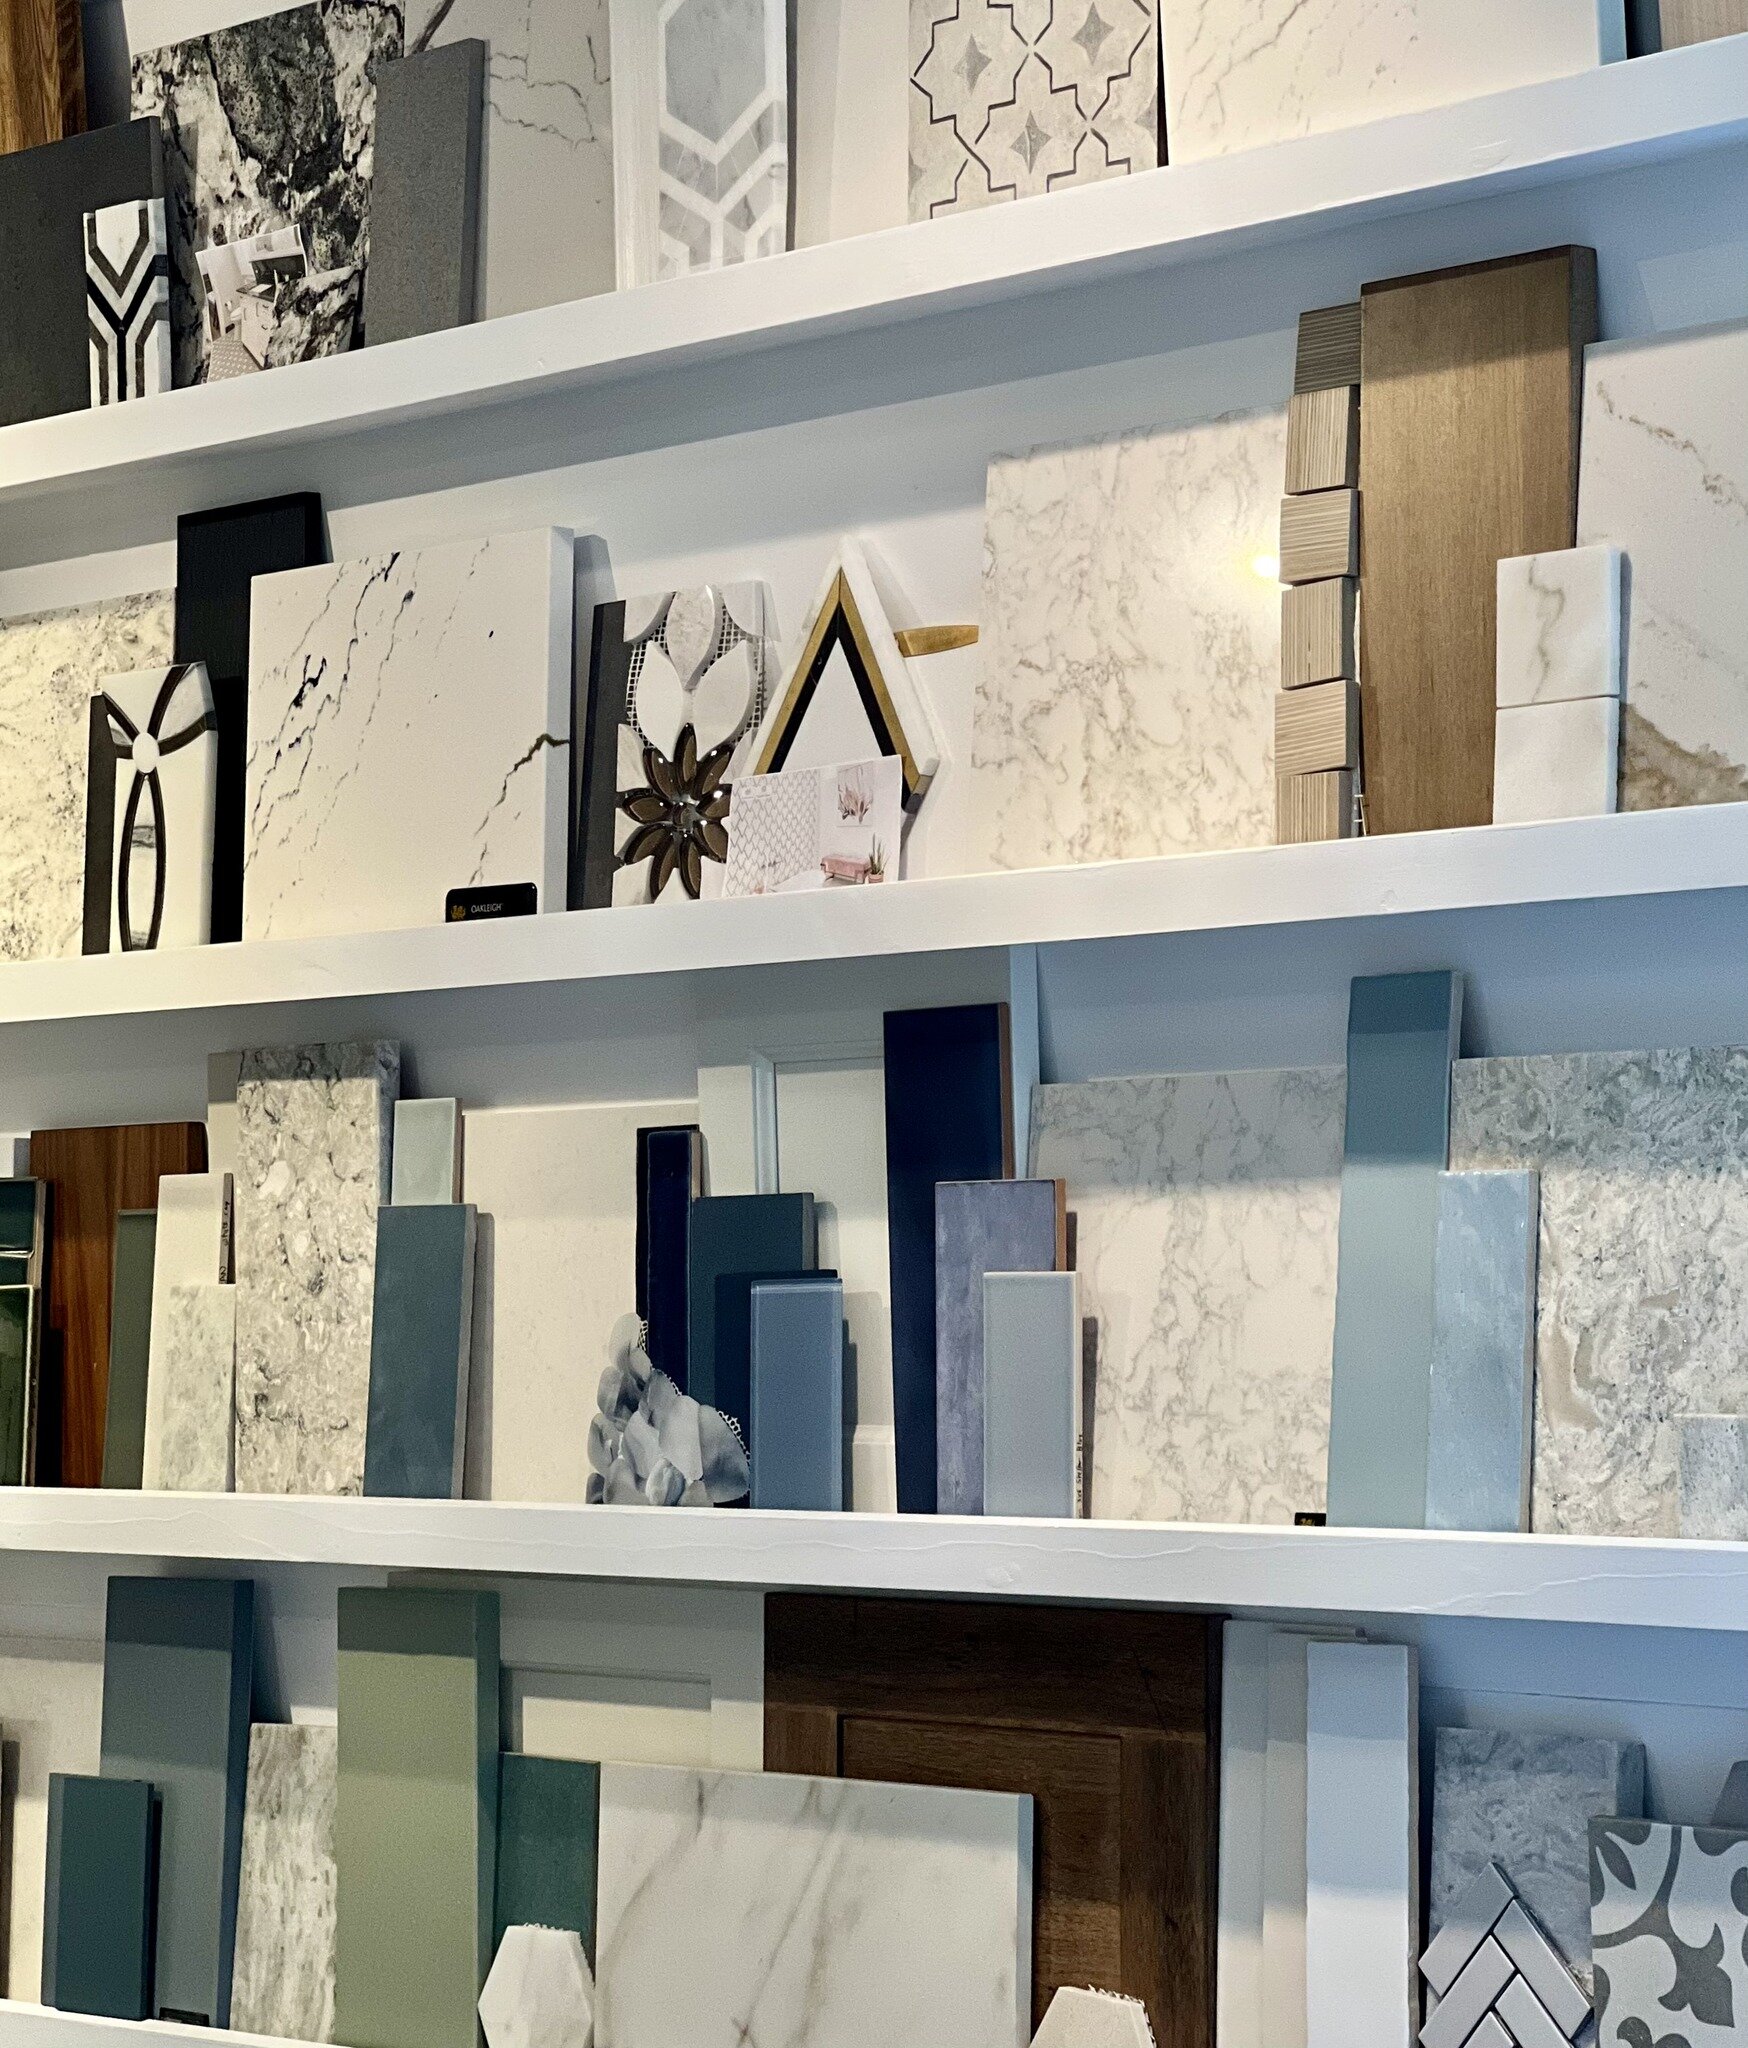 Our kitchen and bathroom design area is now up and running! We have a great selection of cabinetry, countertop, tiles, flooring, lighting and more to complete your next big project.